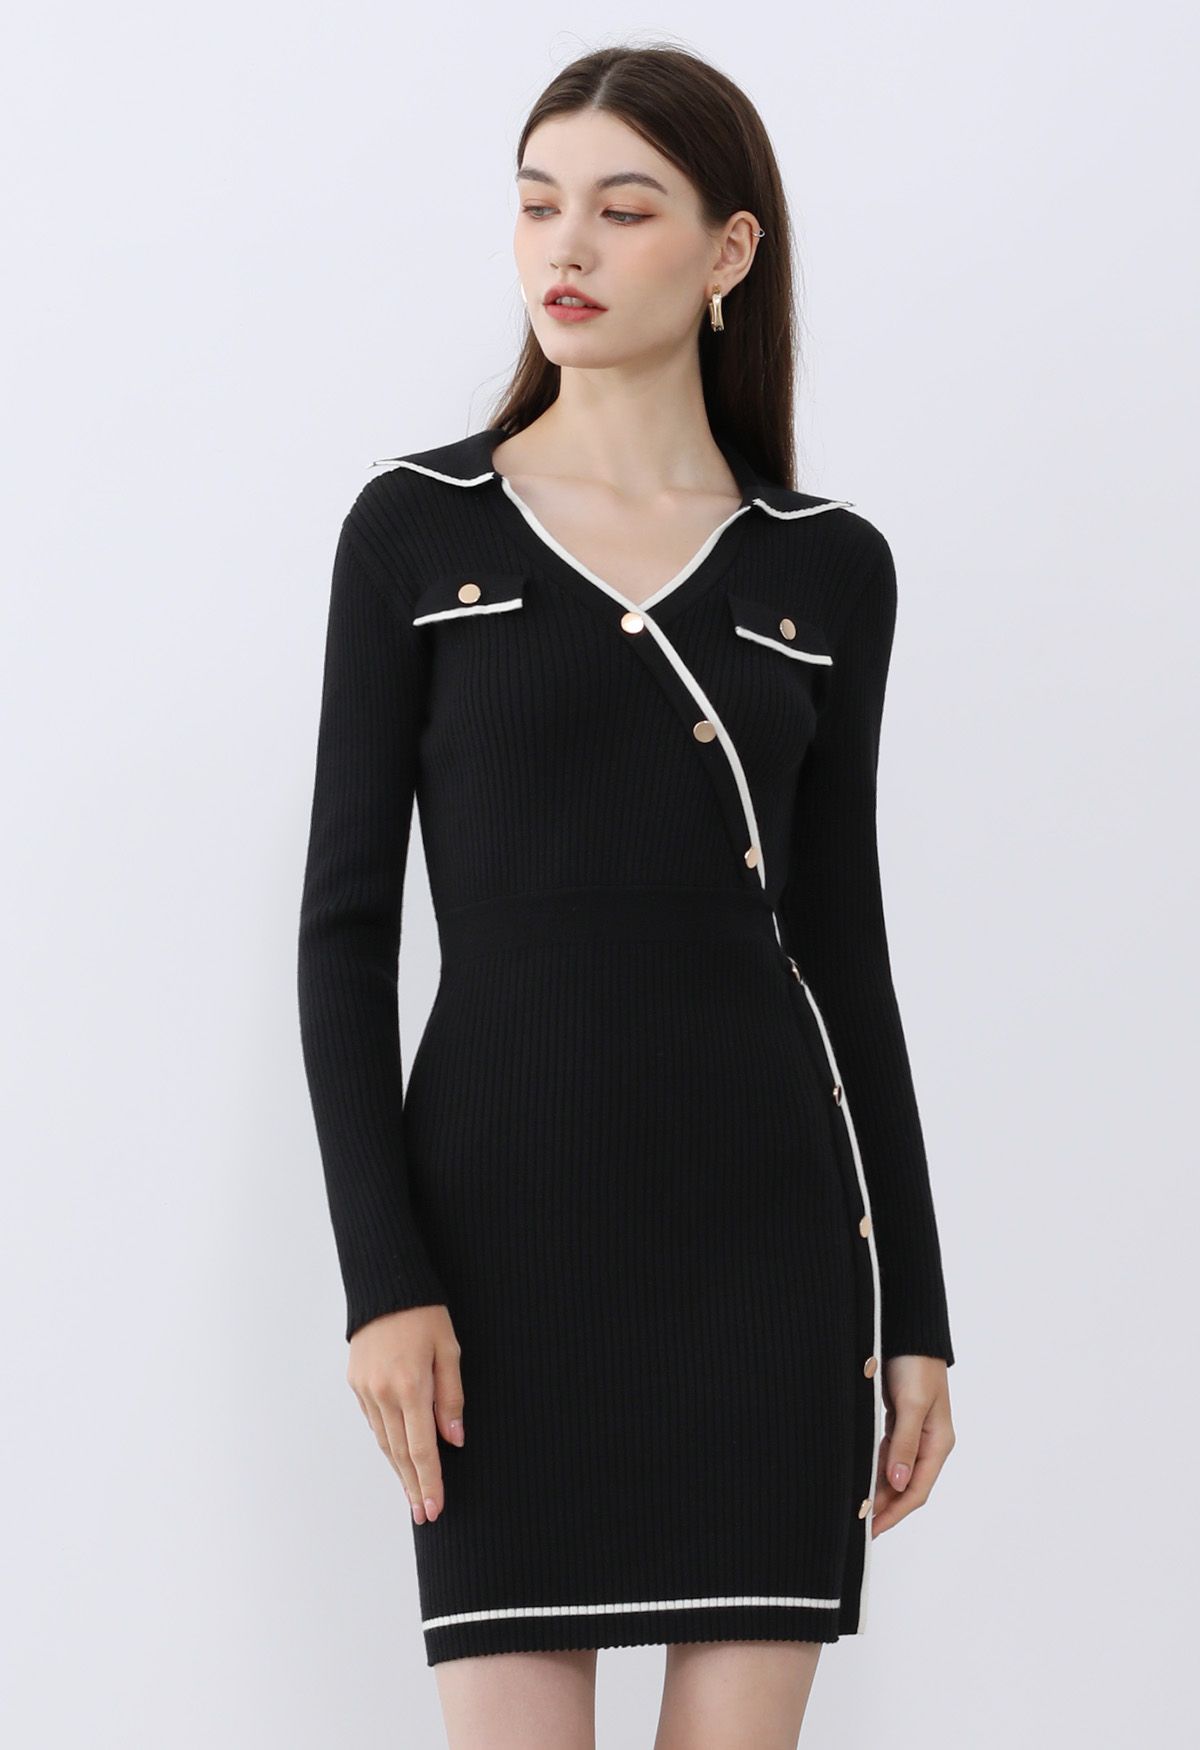 Collared Golden Button Decorated Ribbed Knit Dress in Black